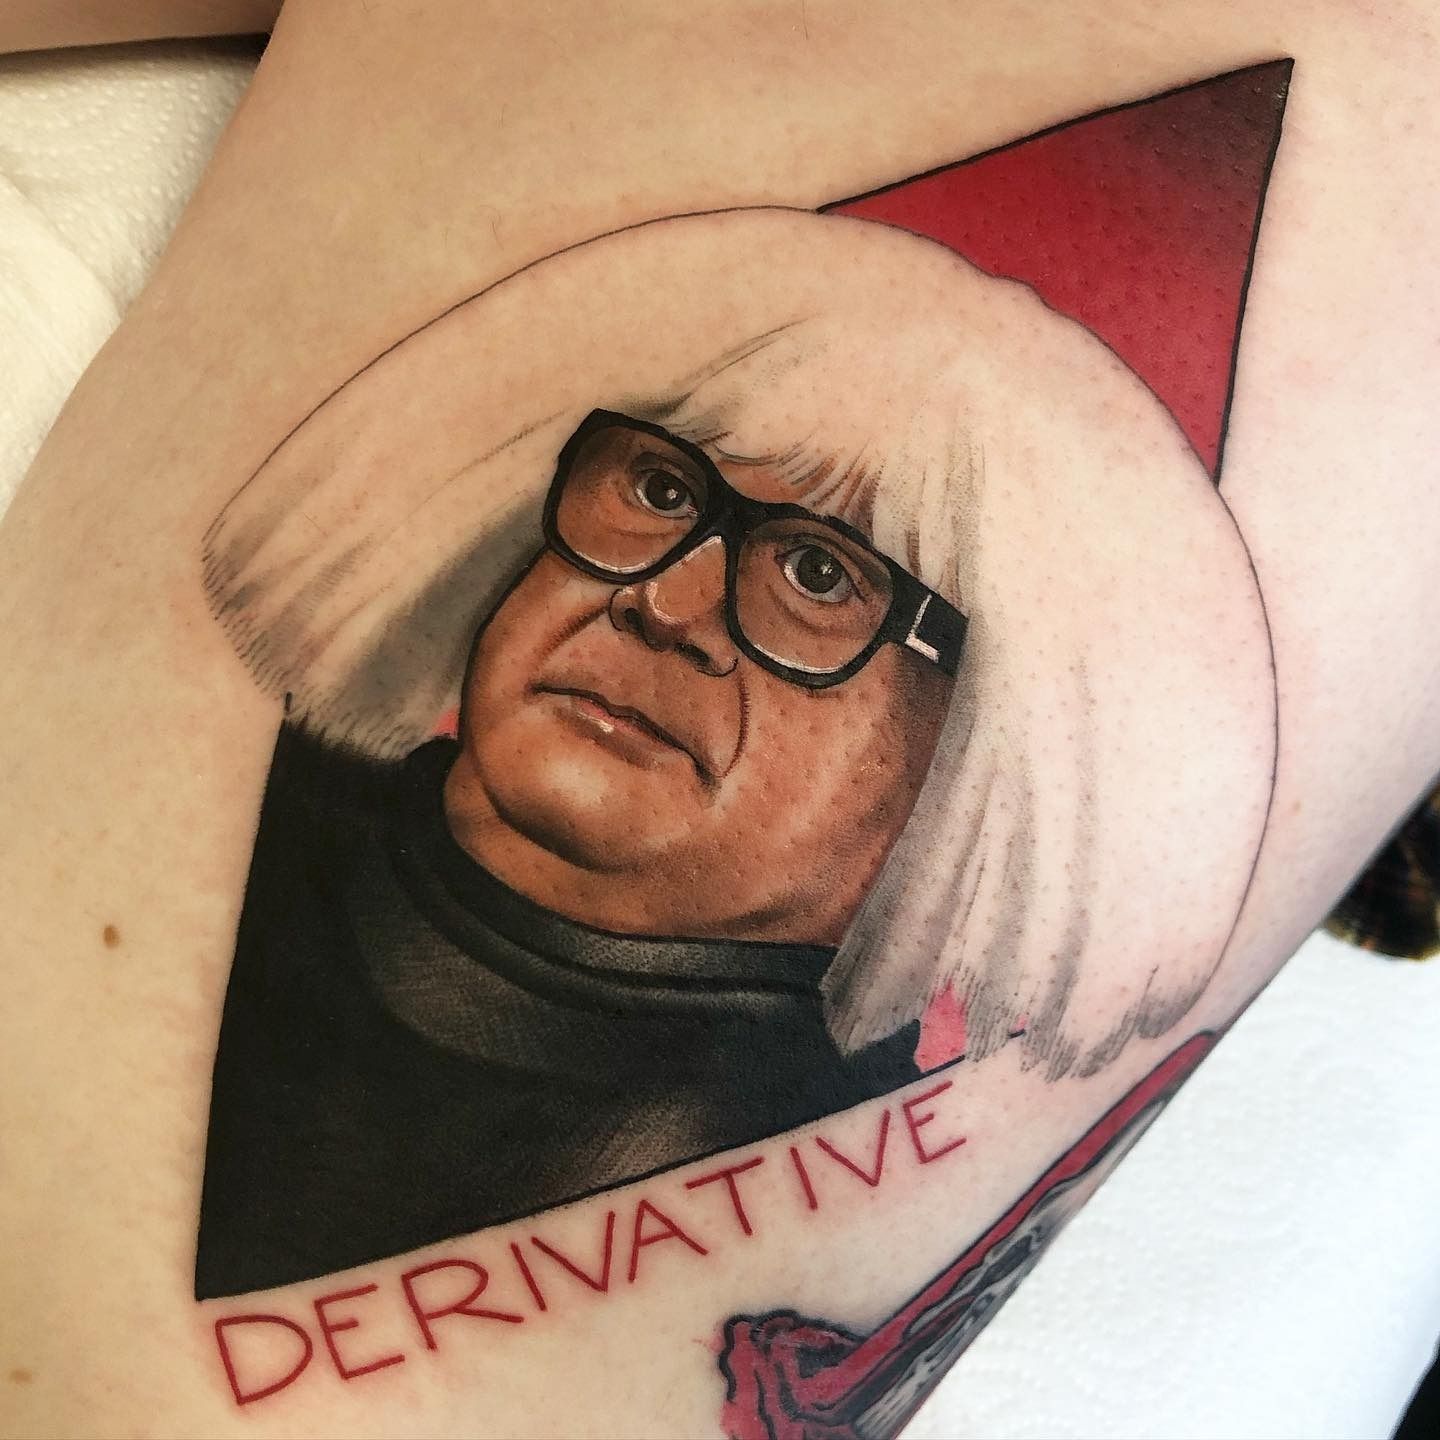 Tattoo uploaded by Becks • • 45 mins Charlie from always sunny tattoo using  9rl and 14rs •done by me • Tattoodo